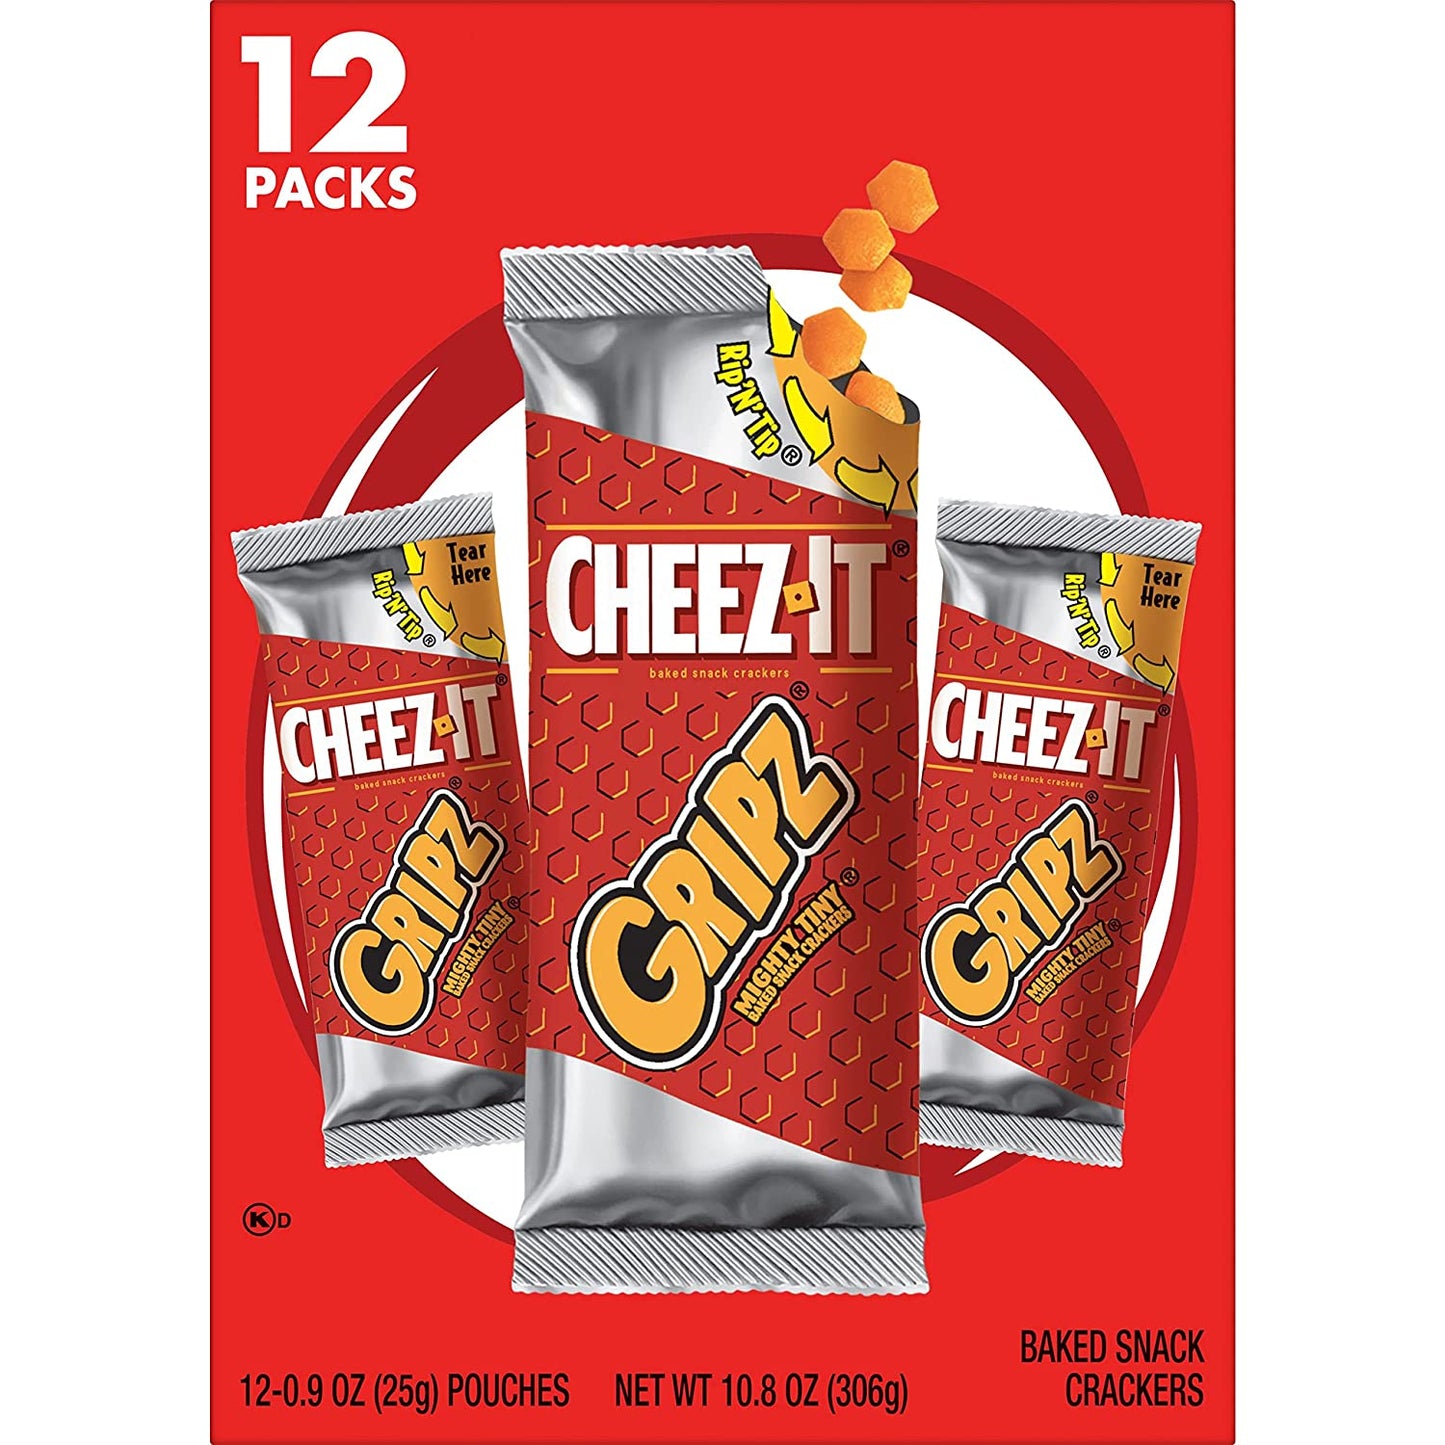 Cheez-It Gripz Tiny Baked Snack Crackers, Lunch Snacks, Office and Kids Snacks, Original, 10.8oz Box (12 Packs)